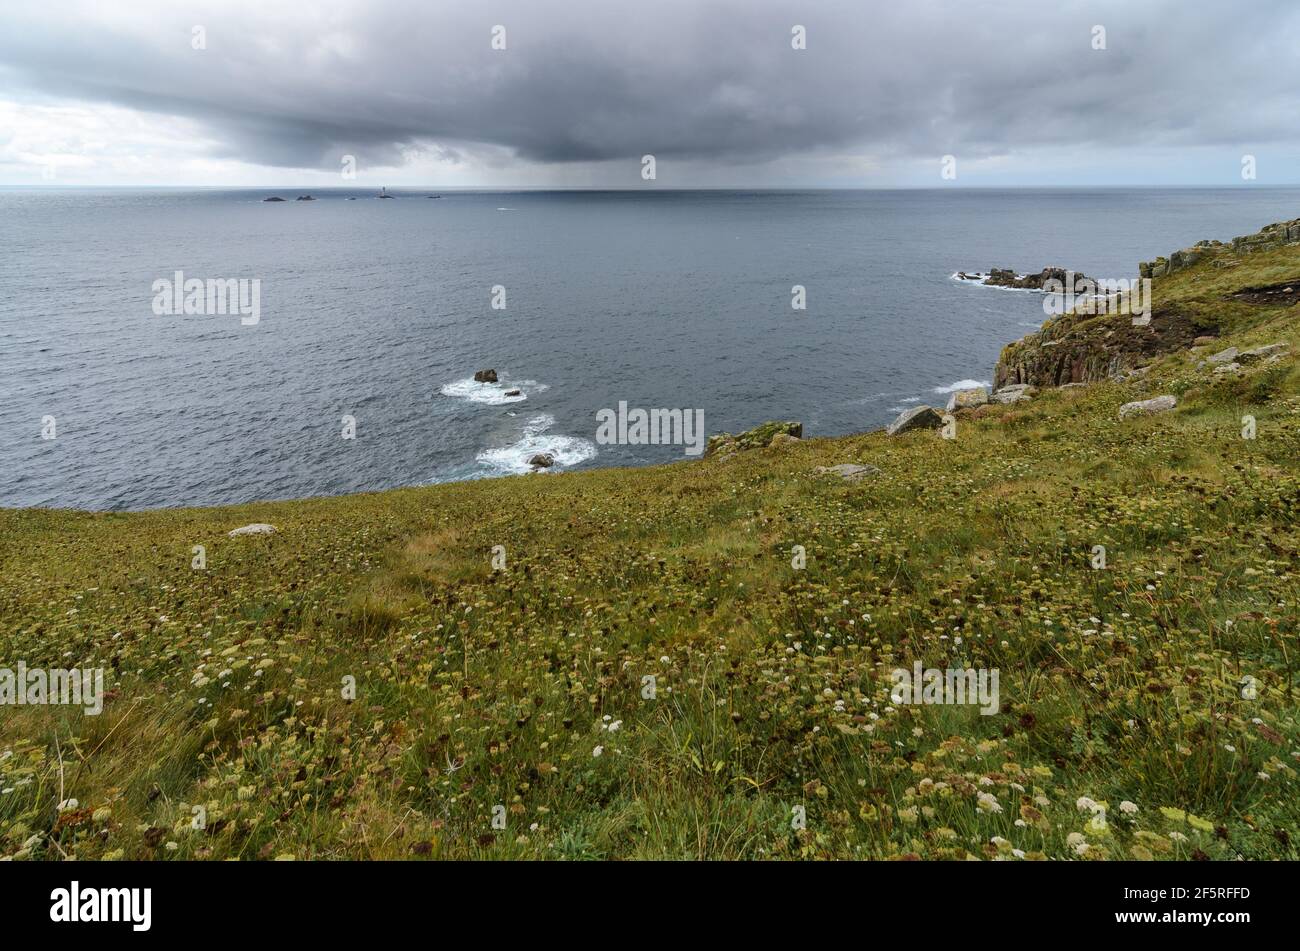 A stormy, rainy day looking out into the Atlantic towards Longships Lighthouse from Land's End in Cornwall, England. Stock Photo